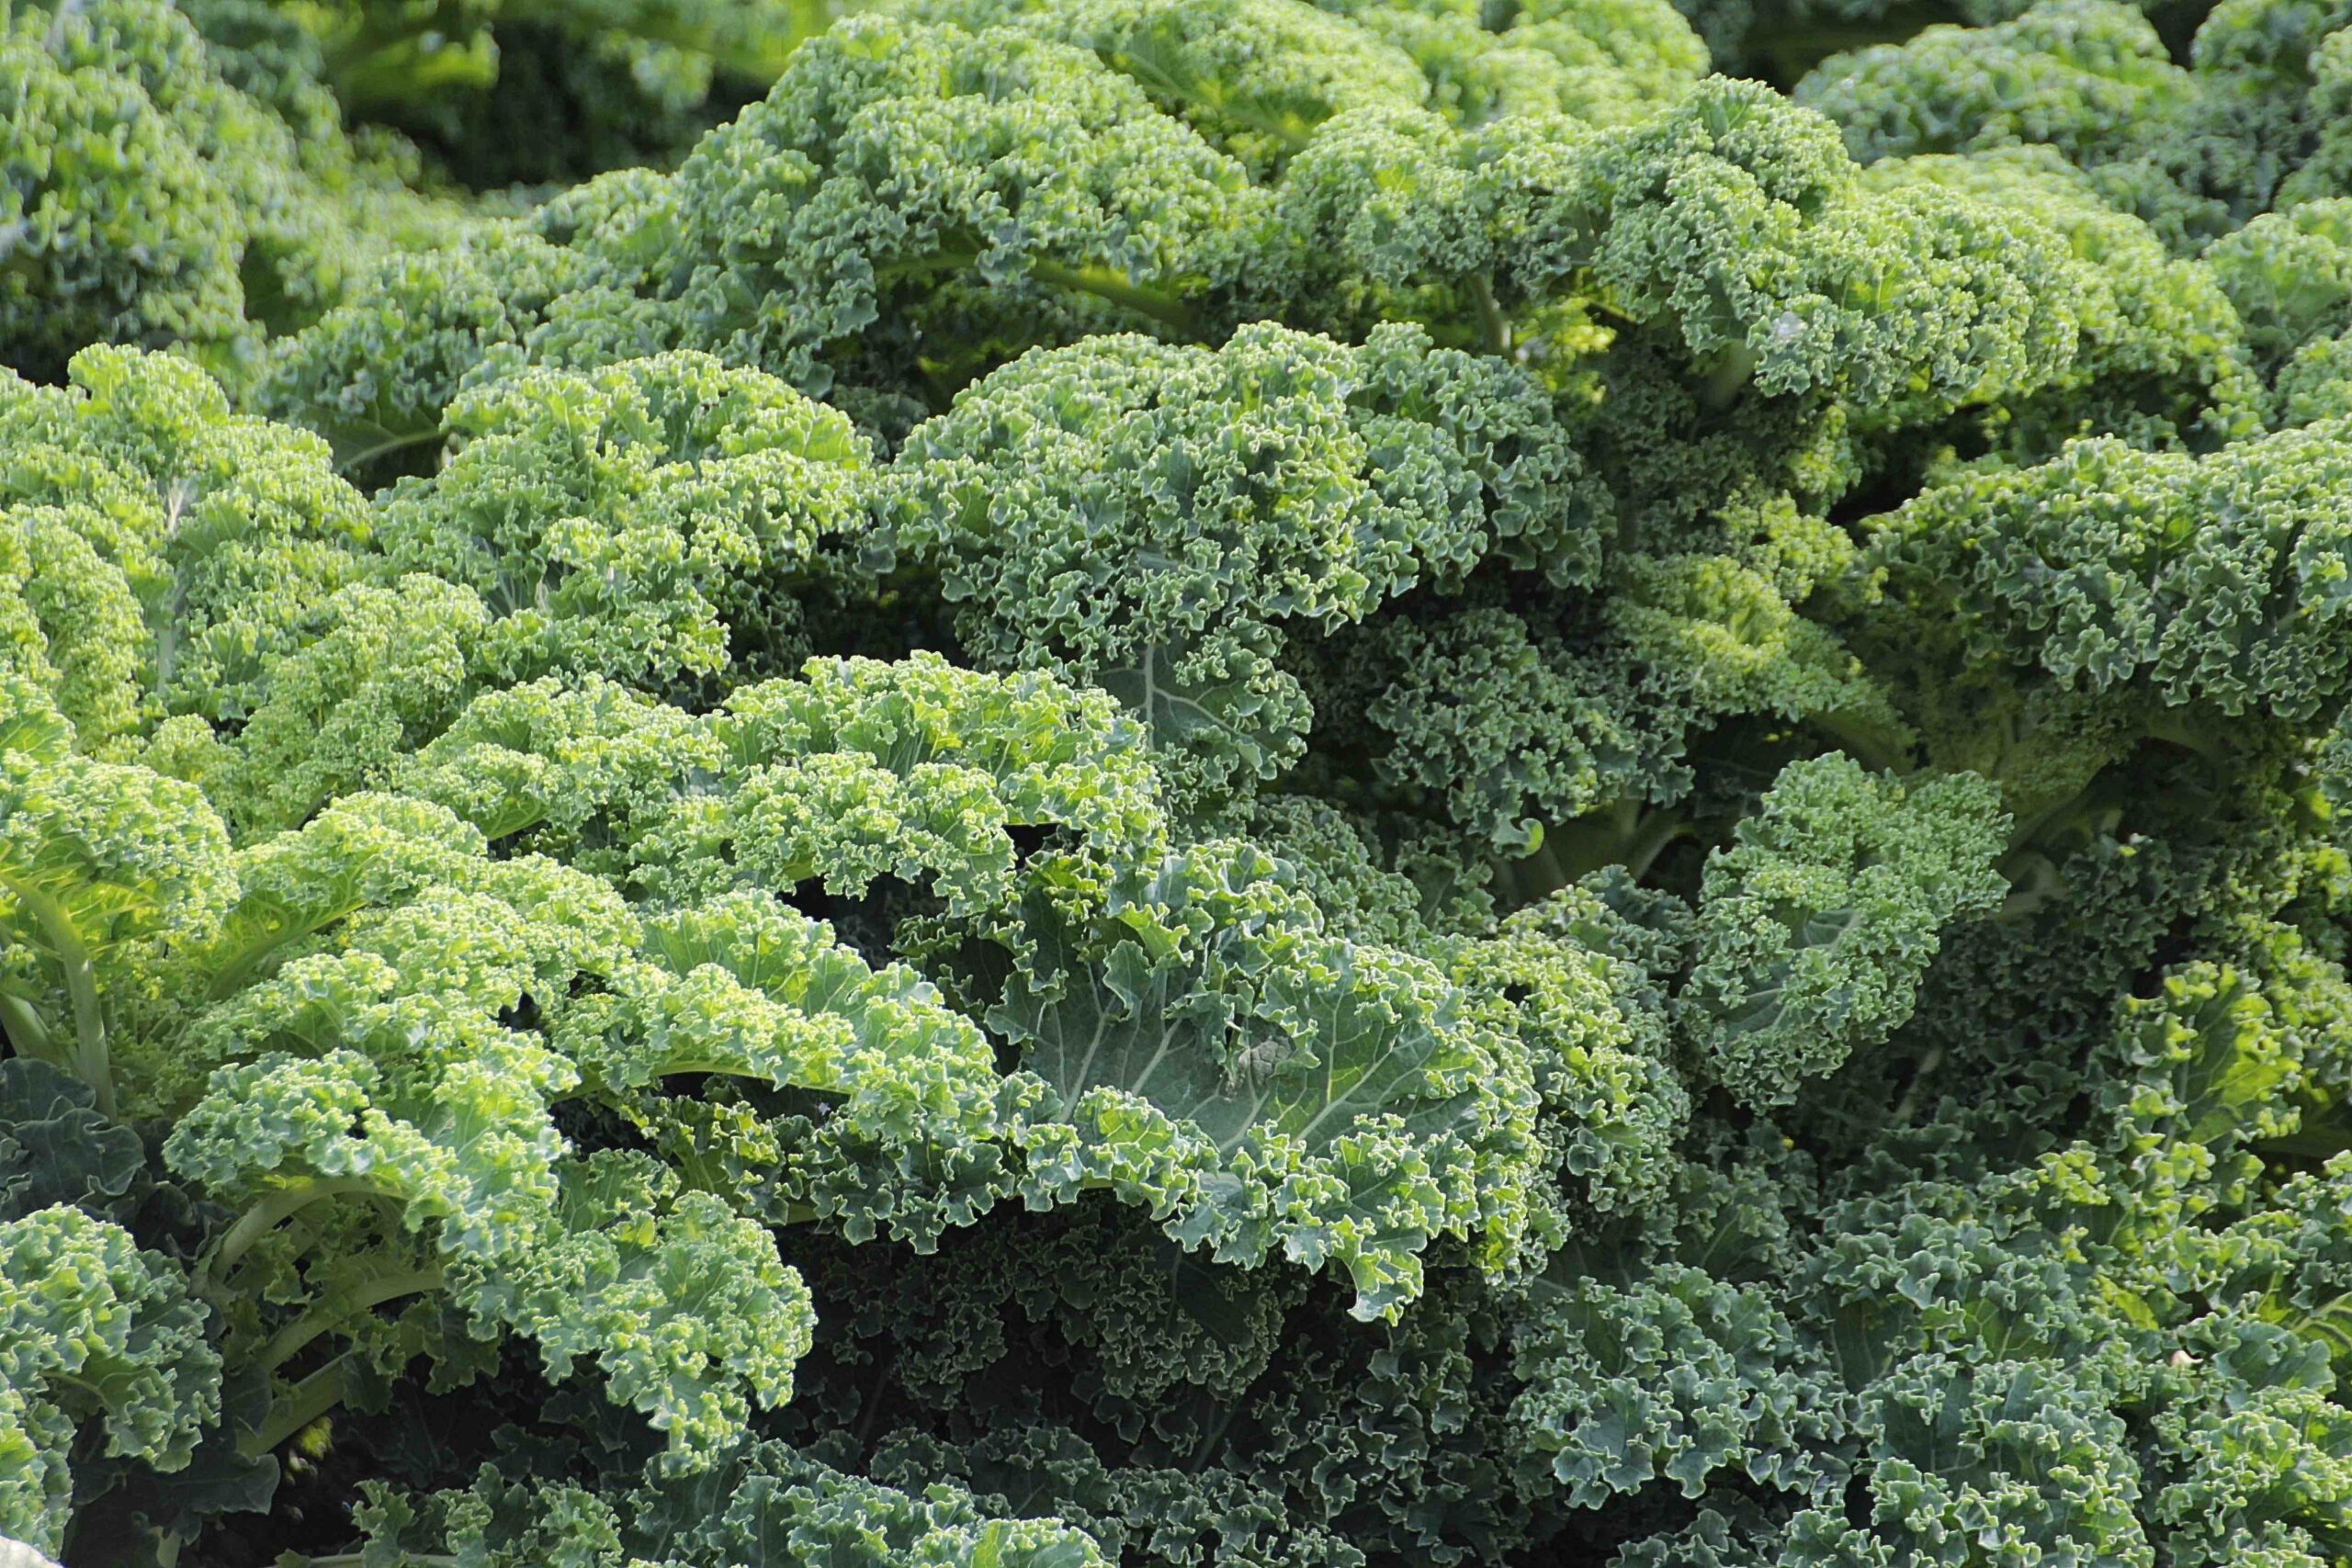 Is the Transition from Conventional to Organic Kale Production Profitable?